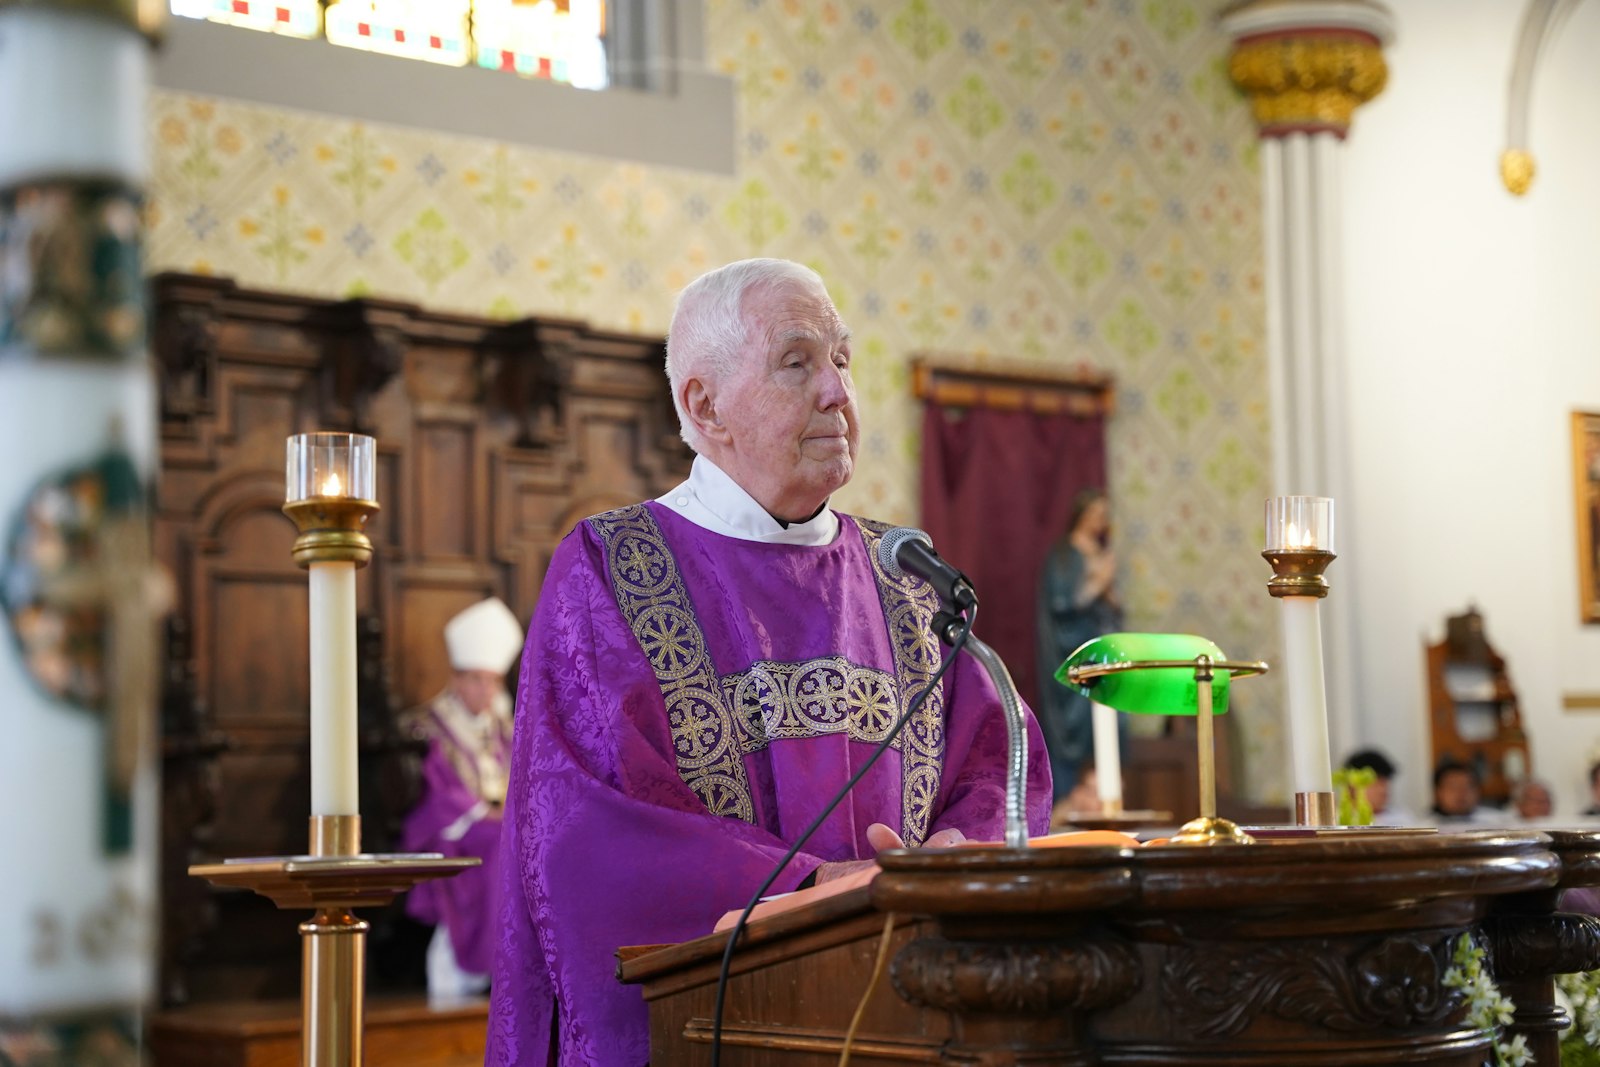 Deacon Patrick McDonald of St. Patrick Parish in Brighton, the longest-serving permanent deacon in the United States, delivered the homily, calling upon the faithful to reflect what will they testify at "their hour," the hour Jesus spoke about many times in the Gospel of St. John.